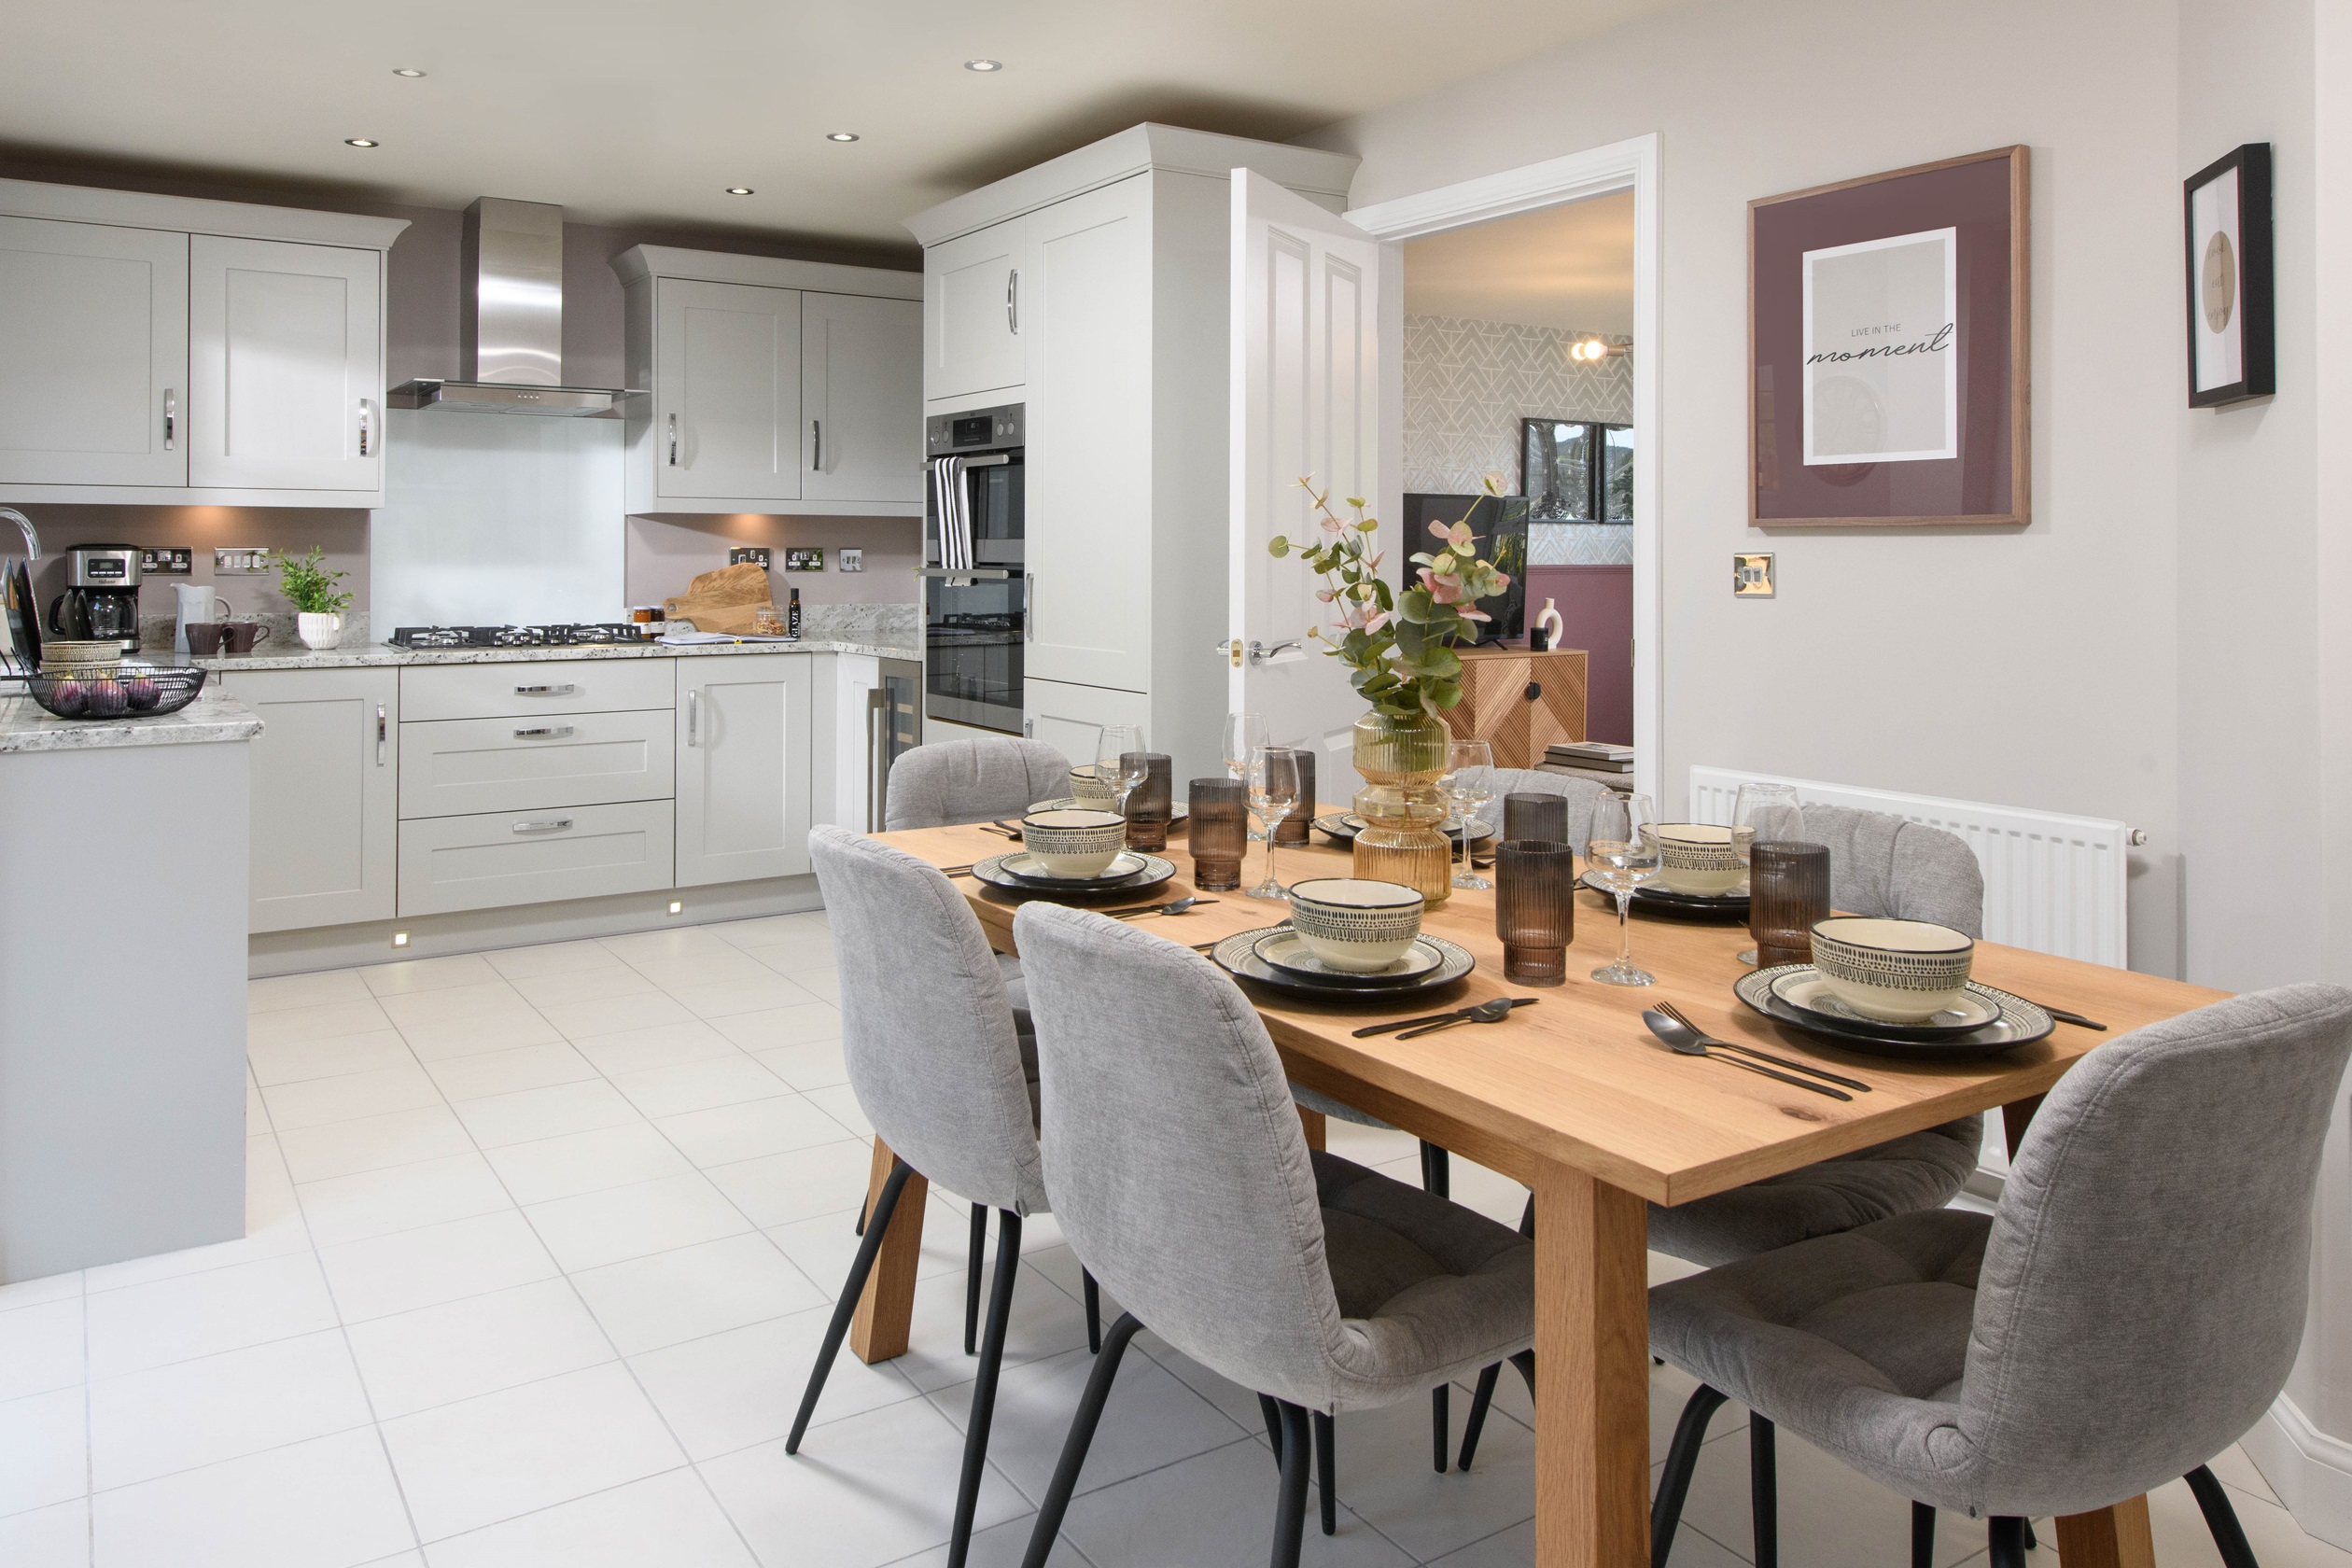 Property 2 of 9. The Mews Windermere Dining Kitchen